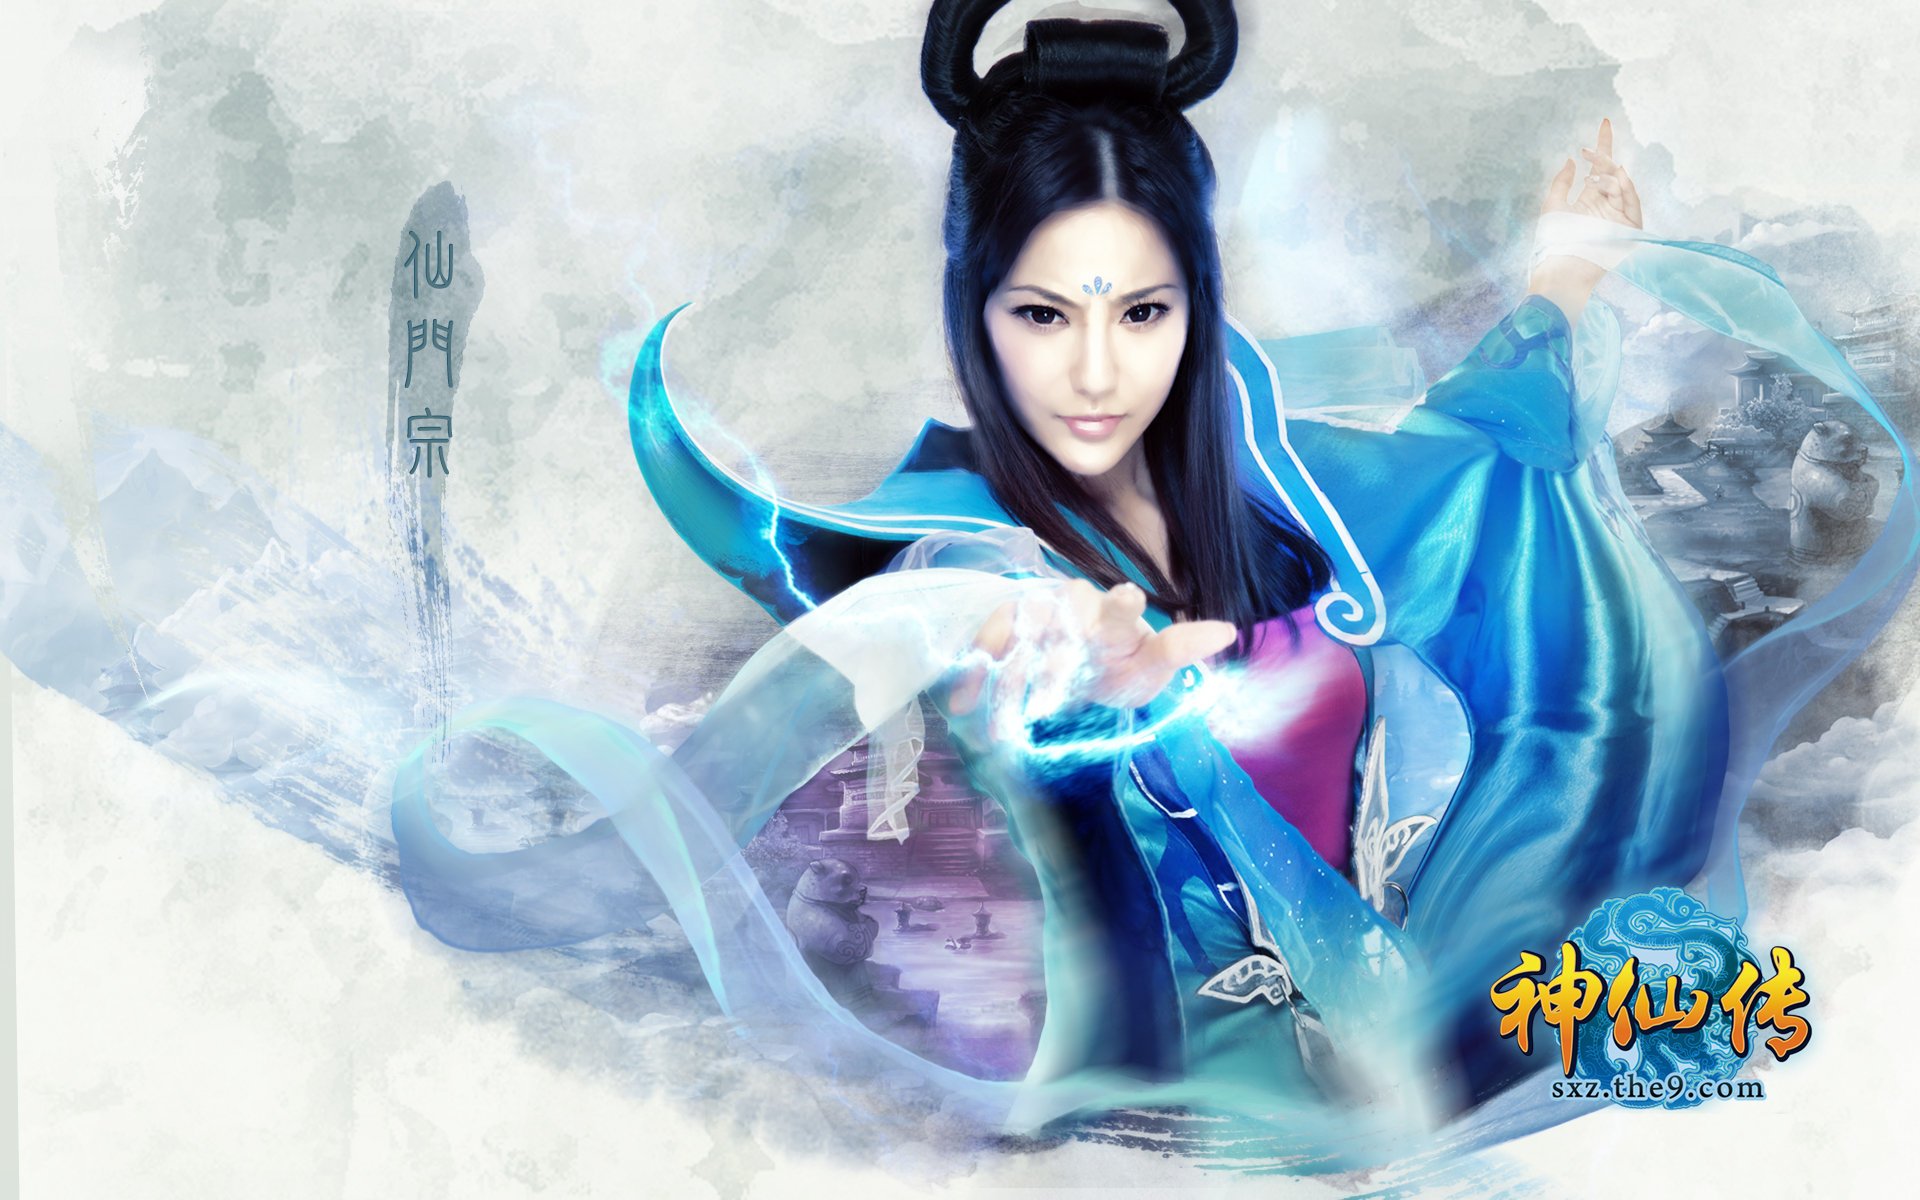 jade, Dynasty, Fantasy, Mmo, Rpg, Action, Fighting, Martial, Kung, 1jaded, Perfect, Online, Zhu, Xian, Supernatural, Biography, Cosplay, Girl, Girls Wallpaper